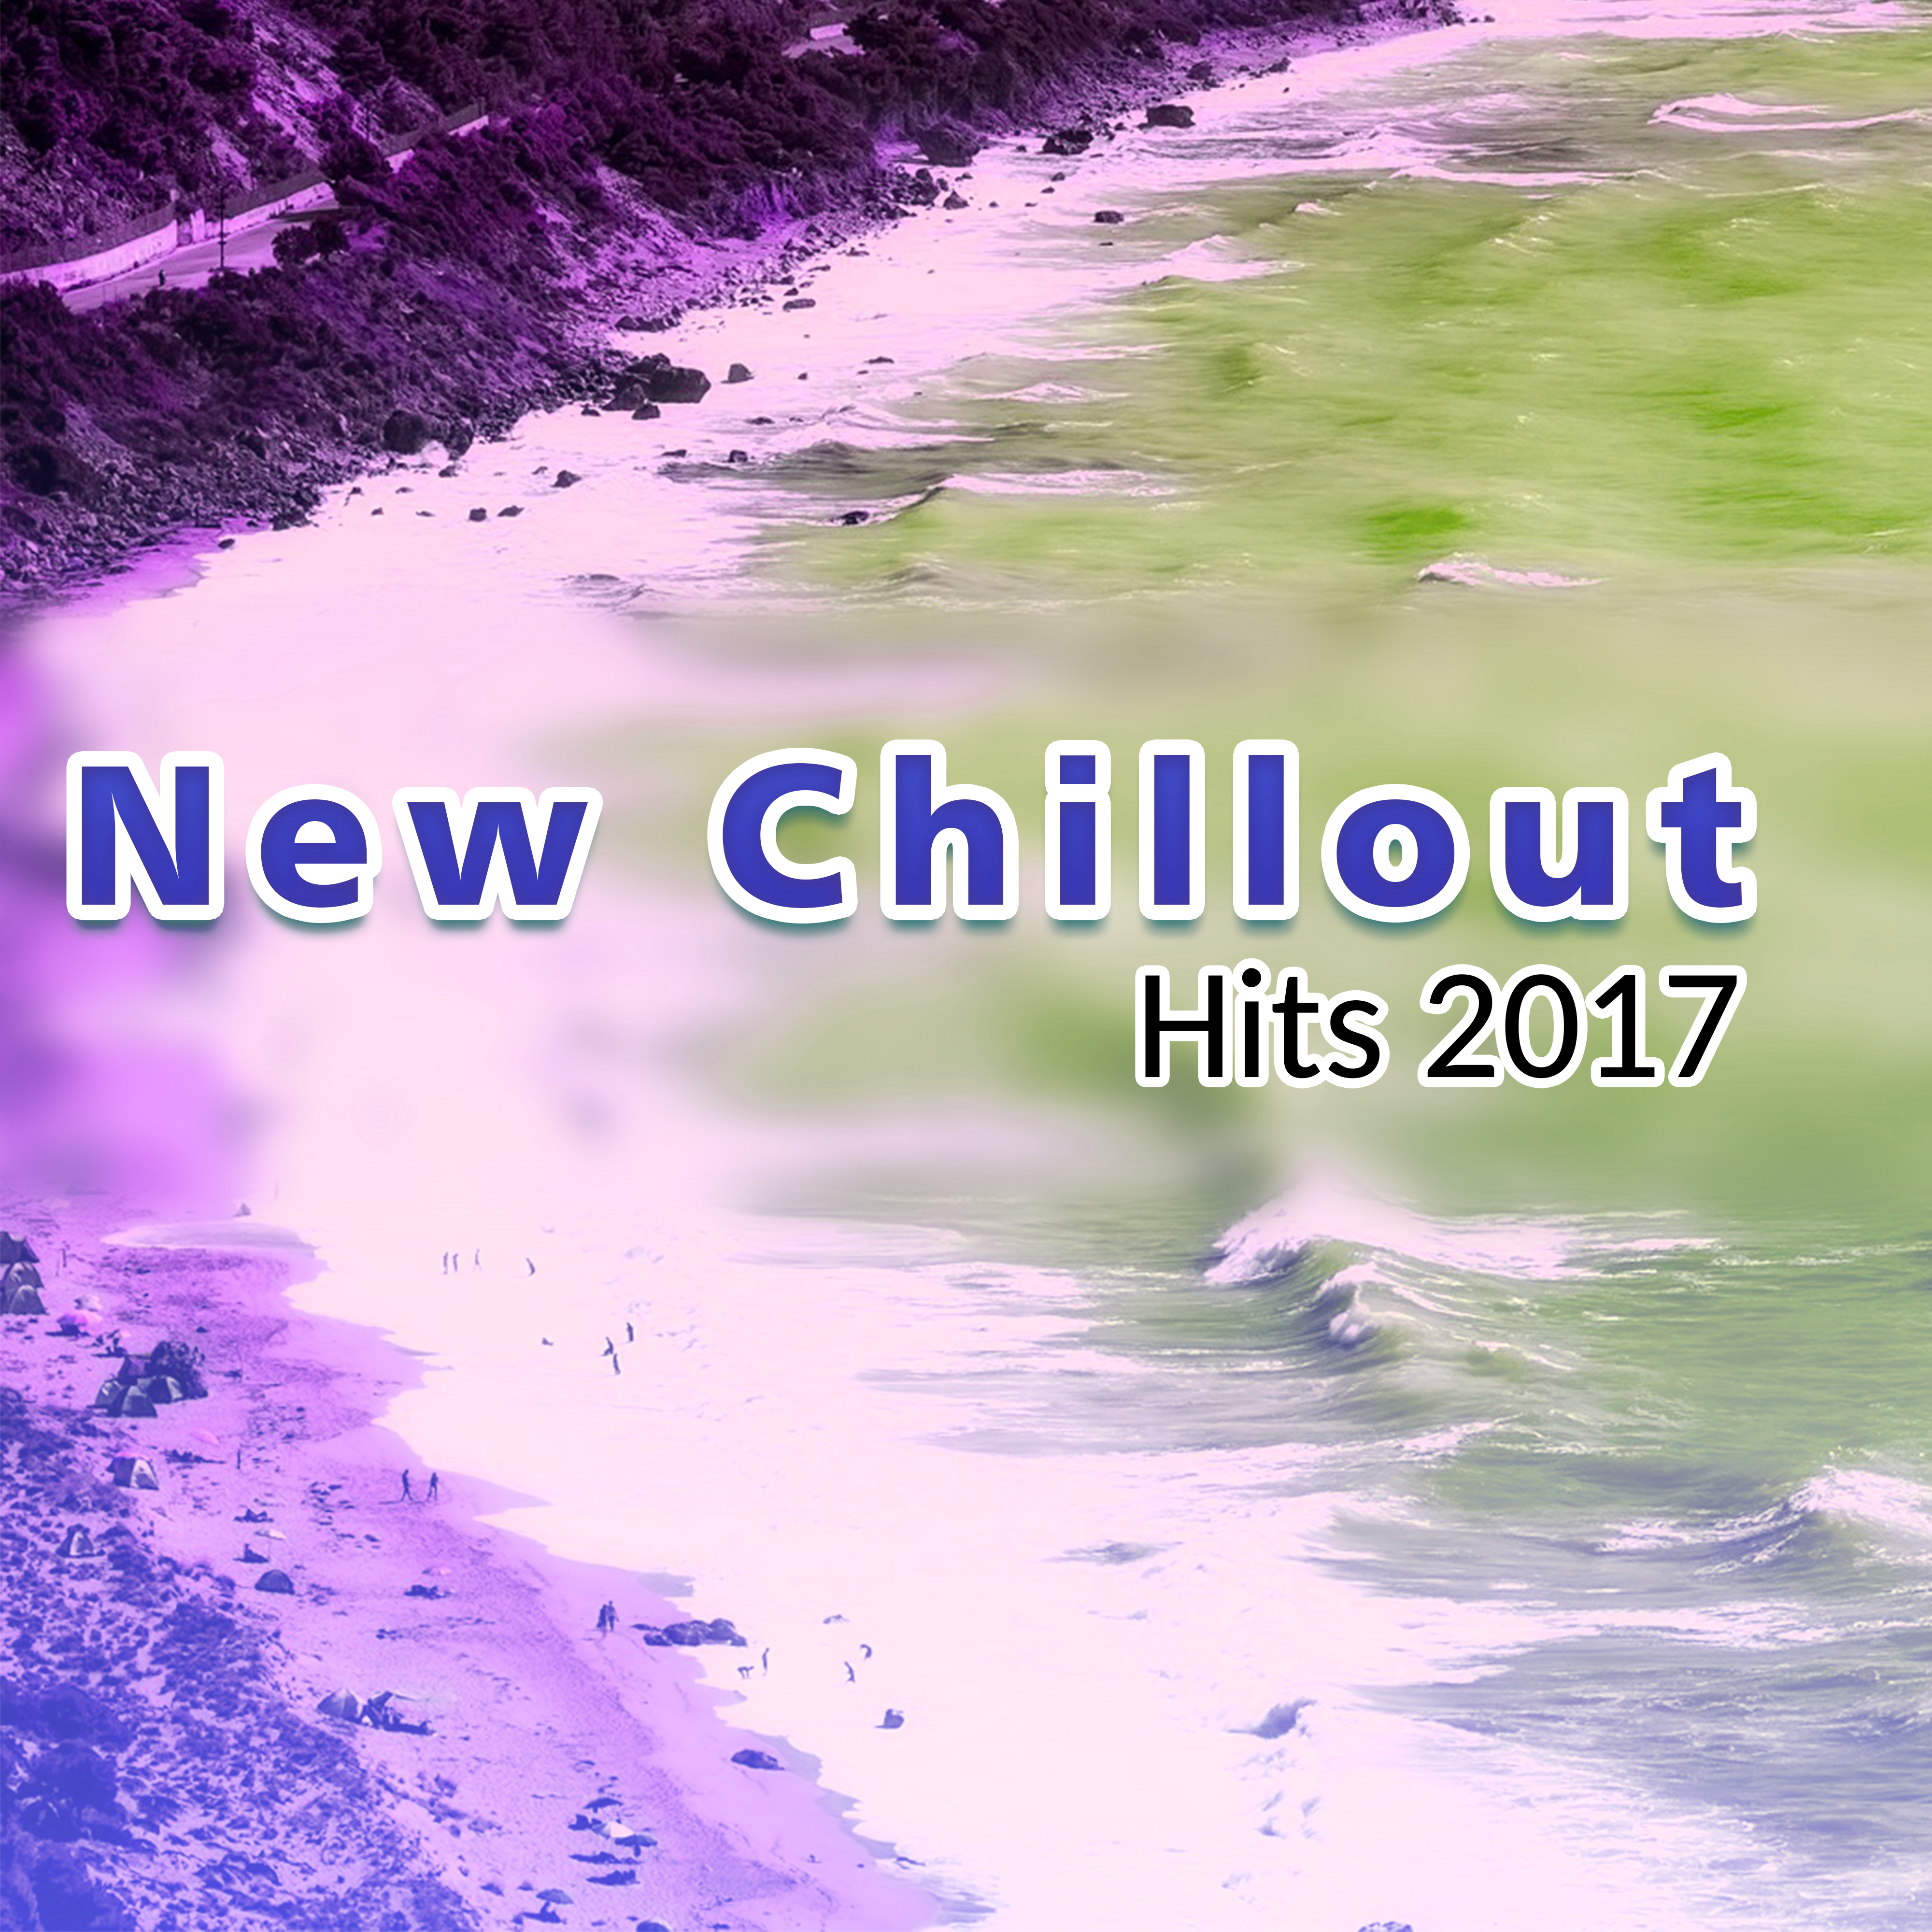 New Chillout Hits 2017  Autumn Hits 2017, Chillout Music, Relax, New Beats